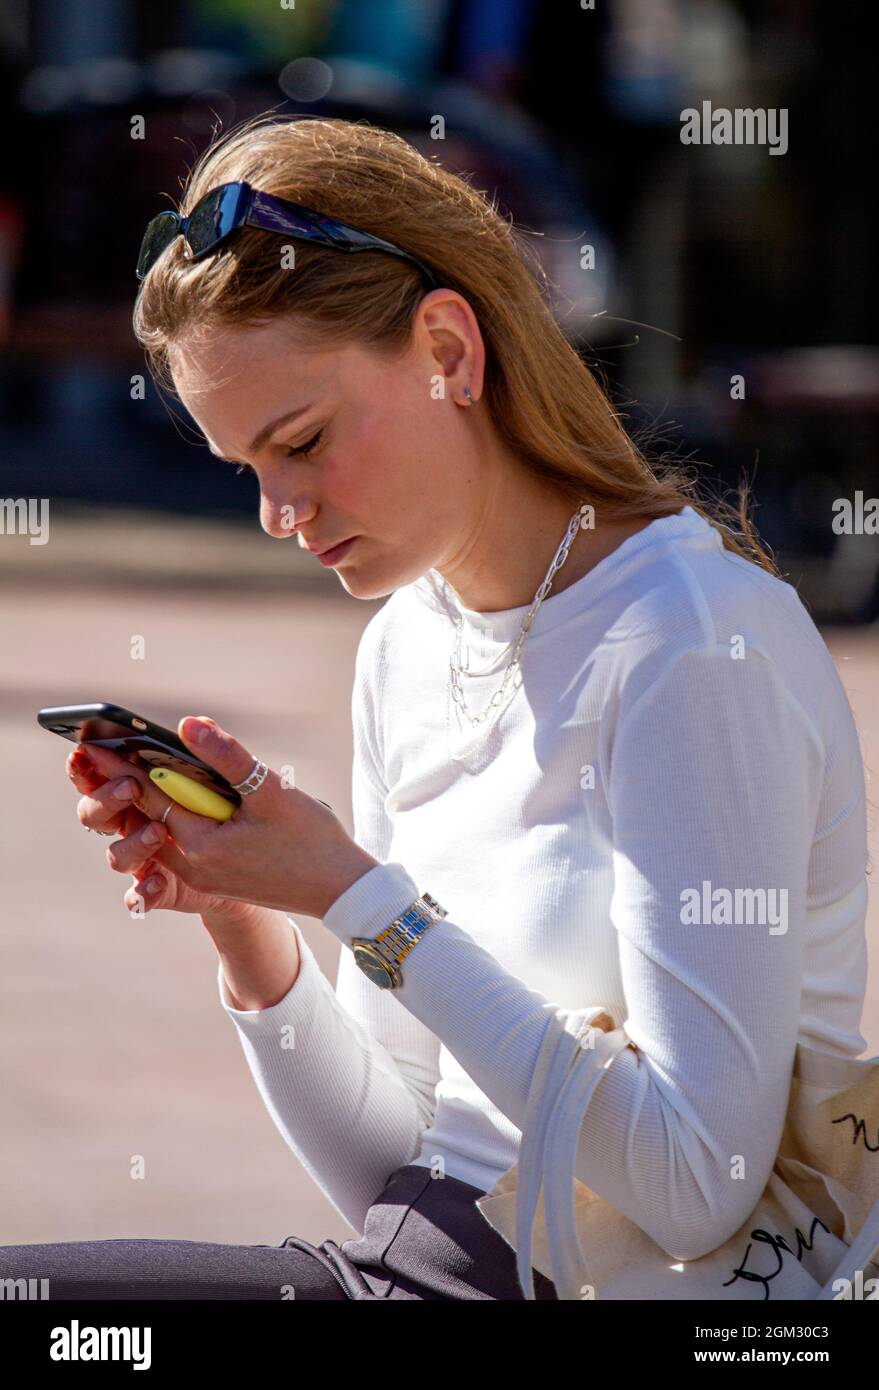 Dundee, Tayside, Scotland, UK. 16th Sep, 2021. UK weather: Warm mid September sunshine across North East Scotland with temperatures reaching 19°C. A glamorous young Polish woman spending the day out enjoying the glorious warm sunny weather whilst texting messages on her mobile phone in Dundee city centre. Credit: Dundee Photographics/Alamy Live News Stock Photo